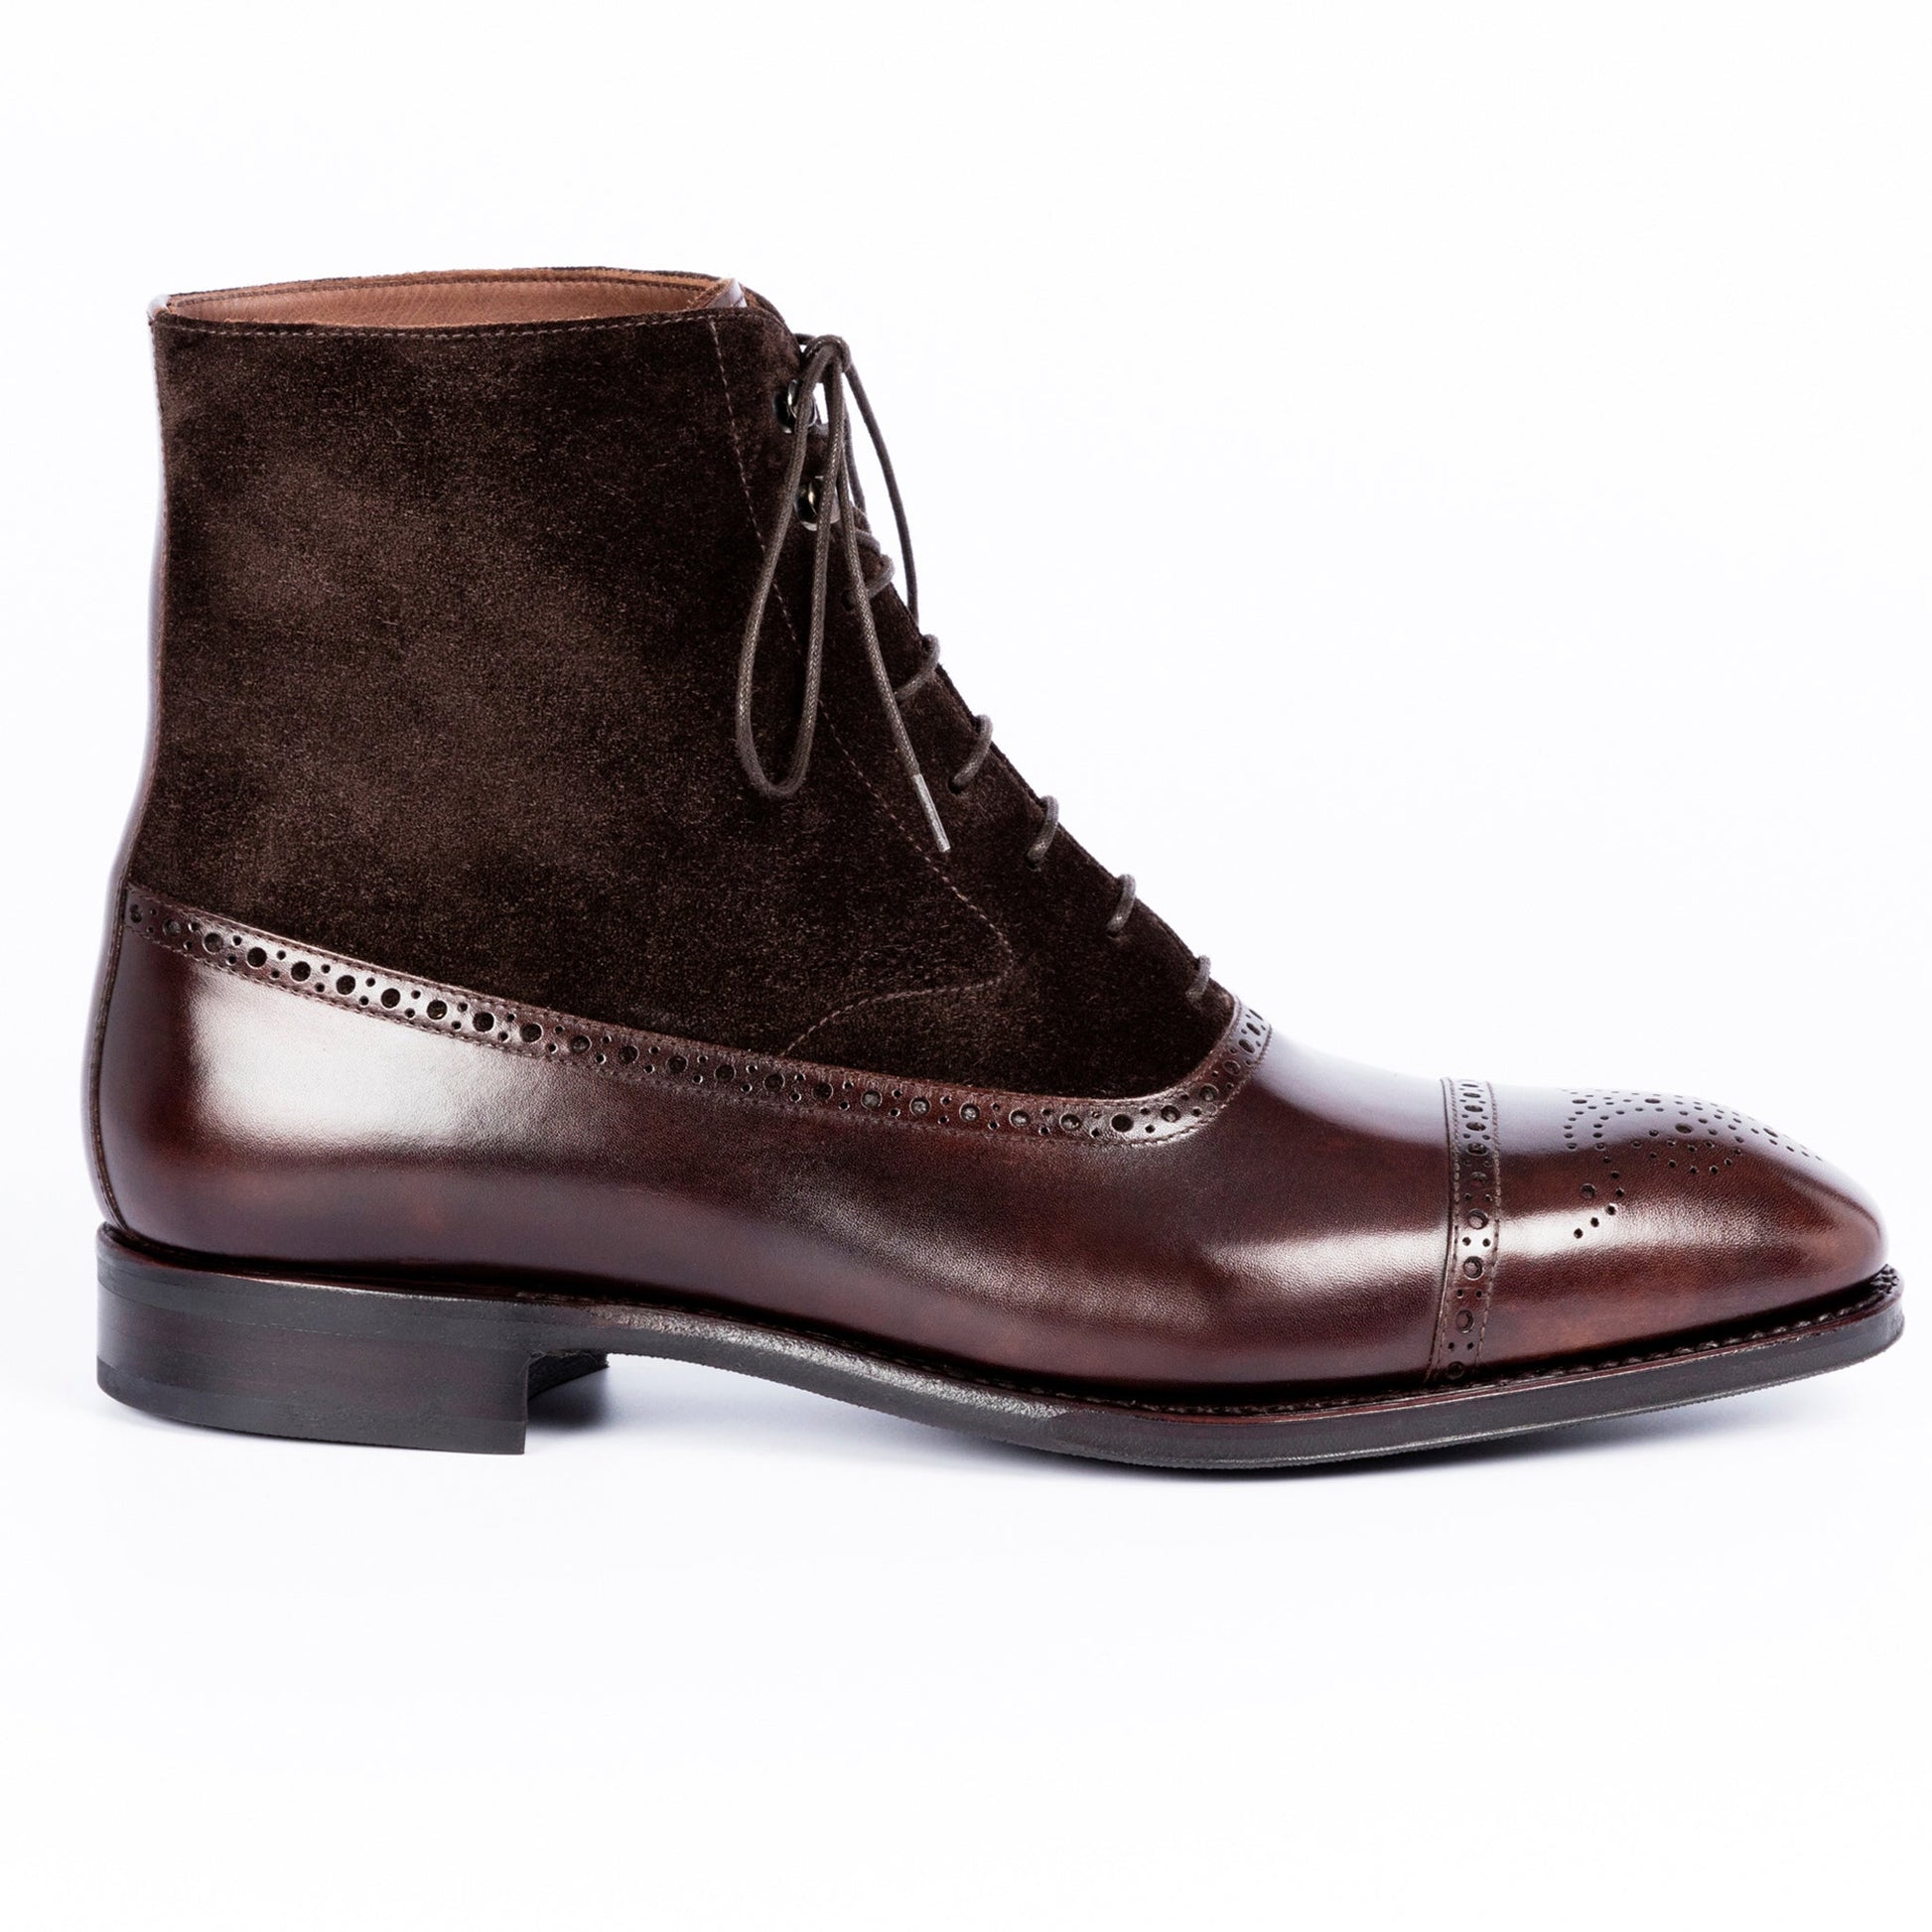 TLB Mallorca  Leather Men's Boots made in Spain